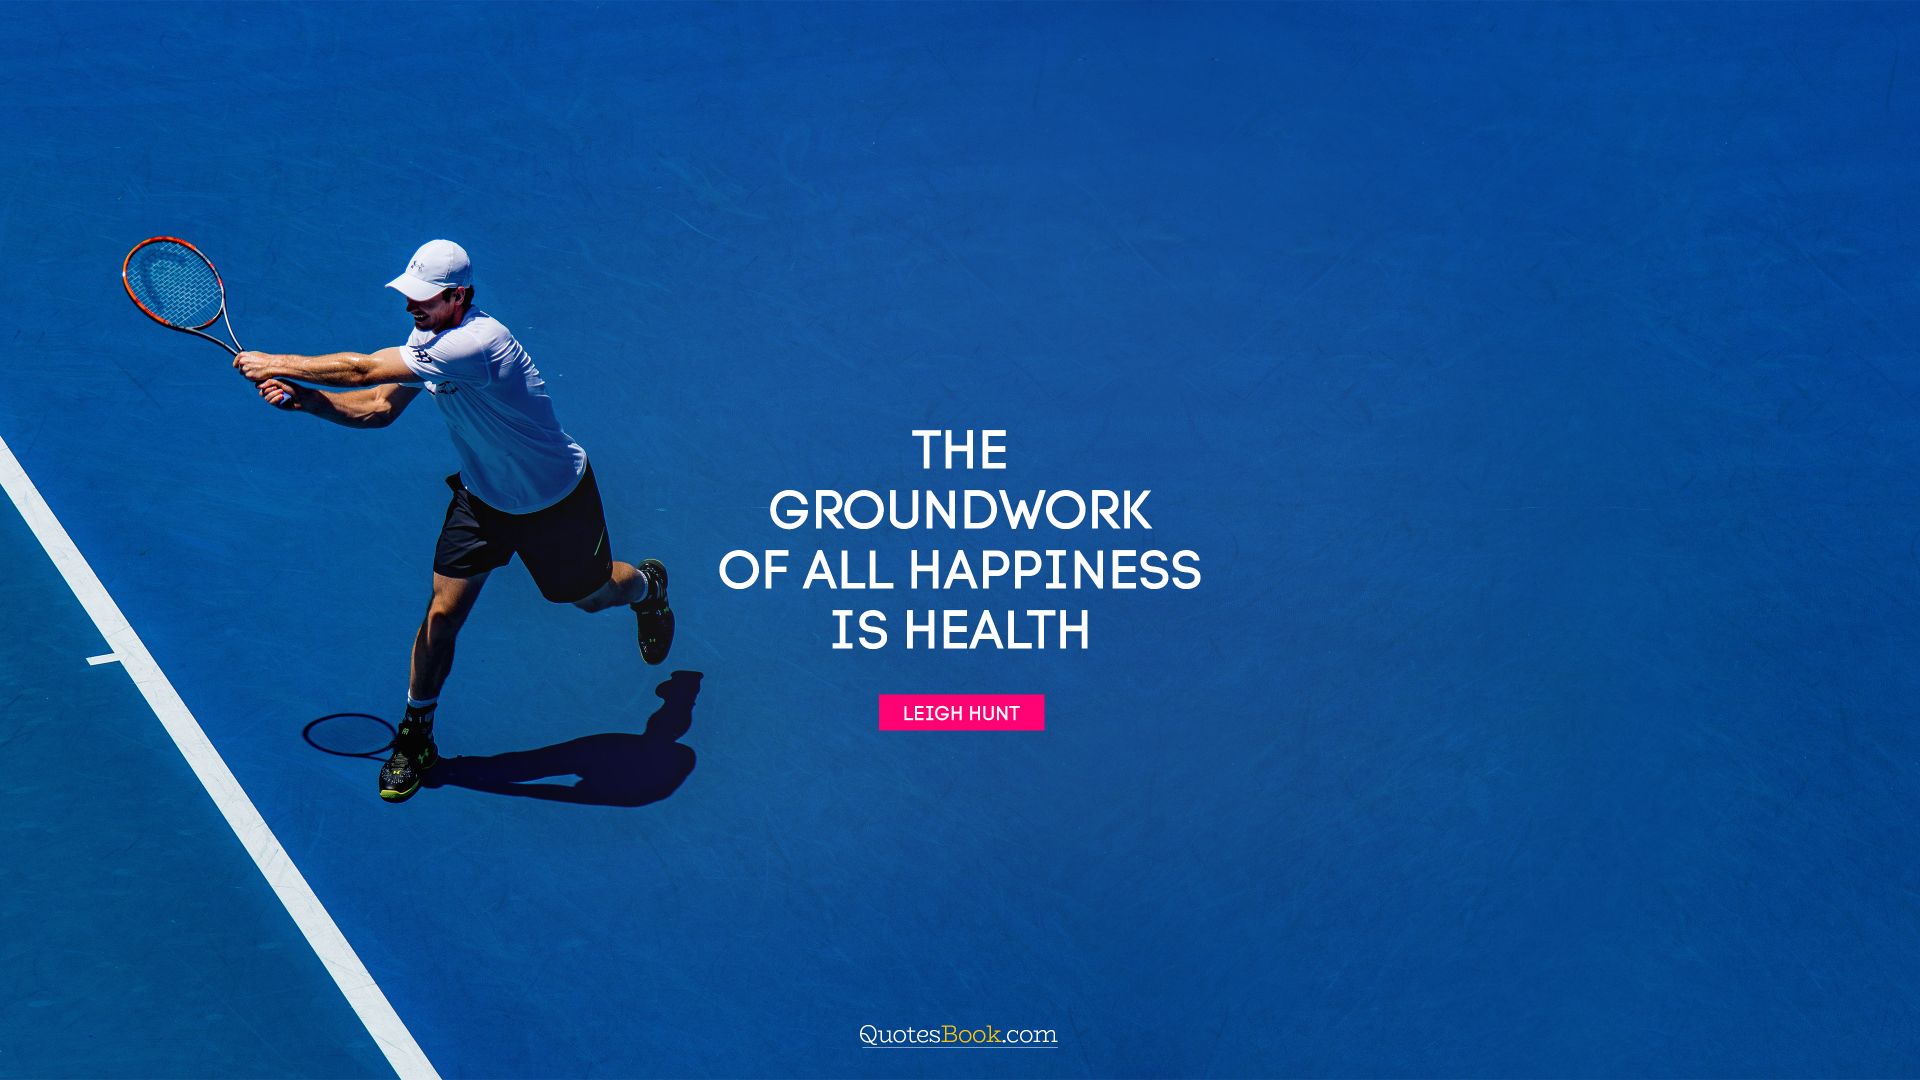 The groundwork of all happiness is health. - Quote by Leigh Hunt